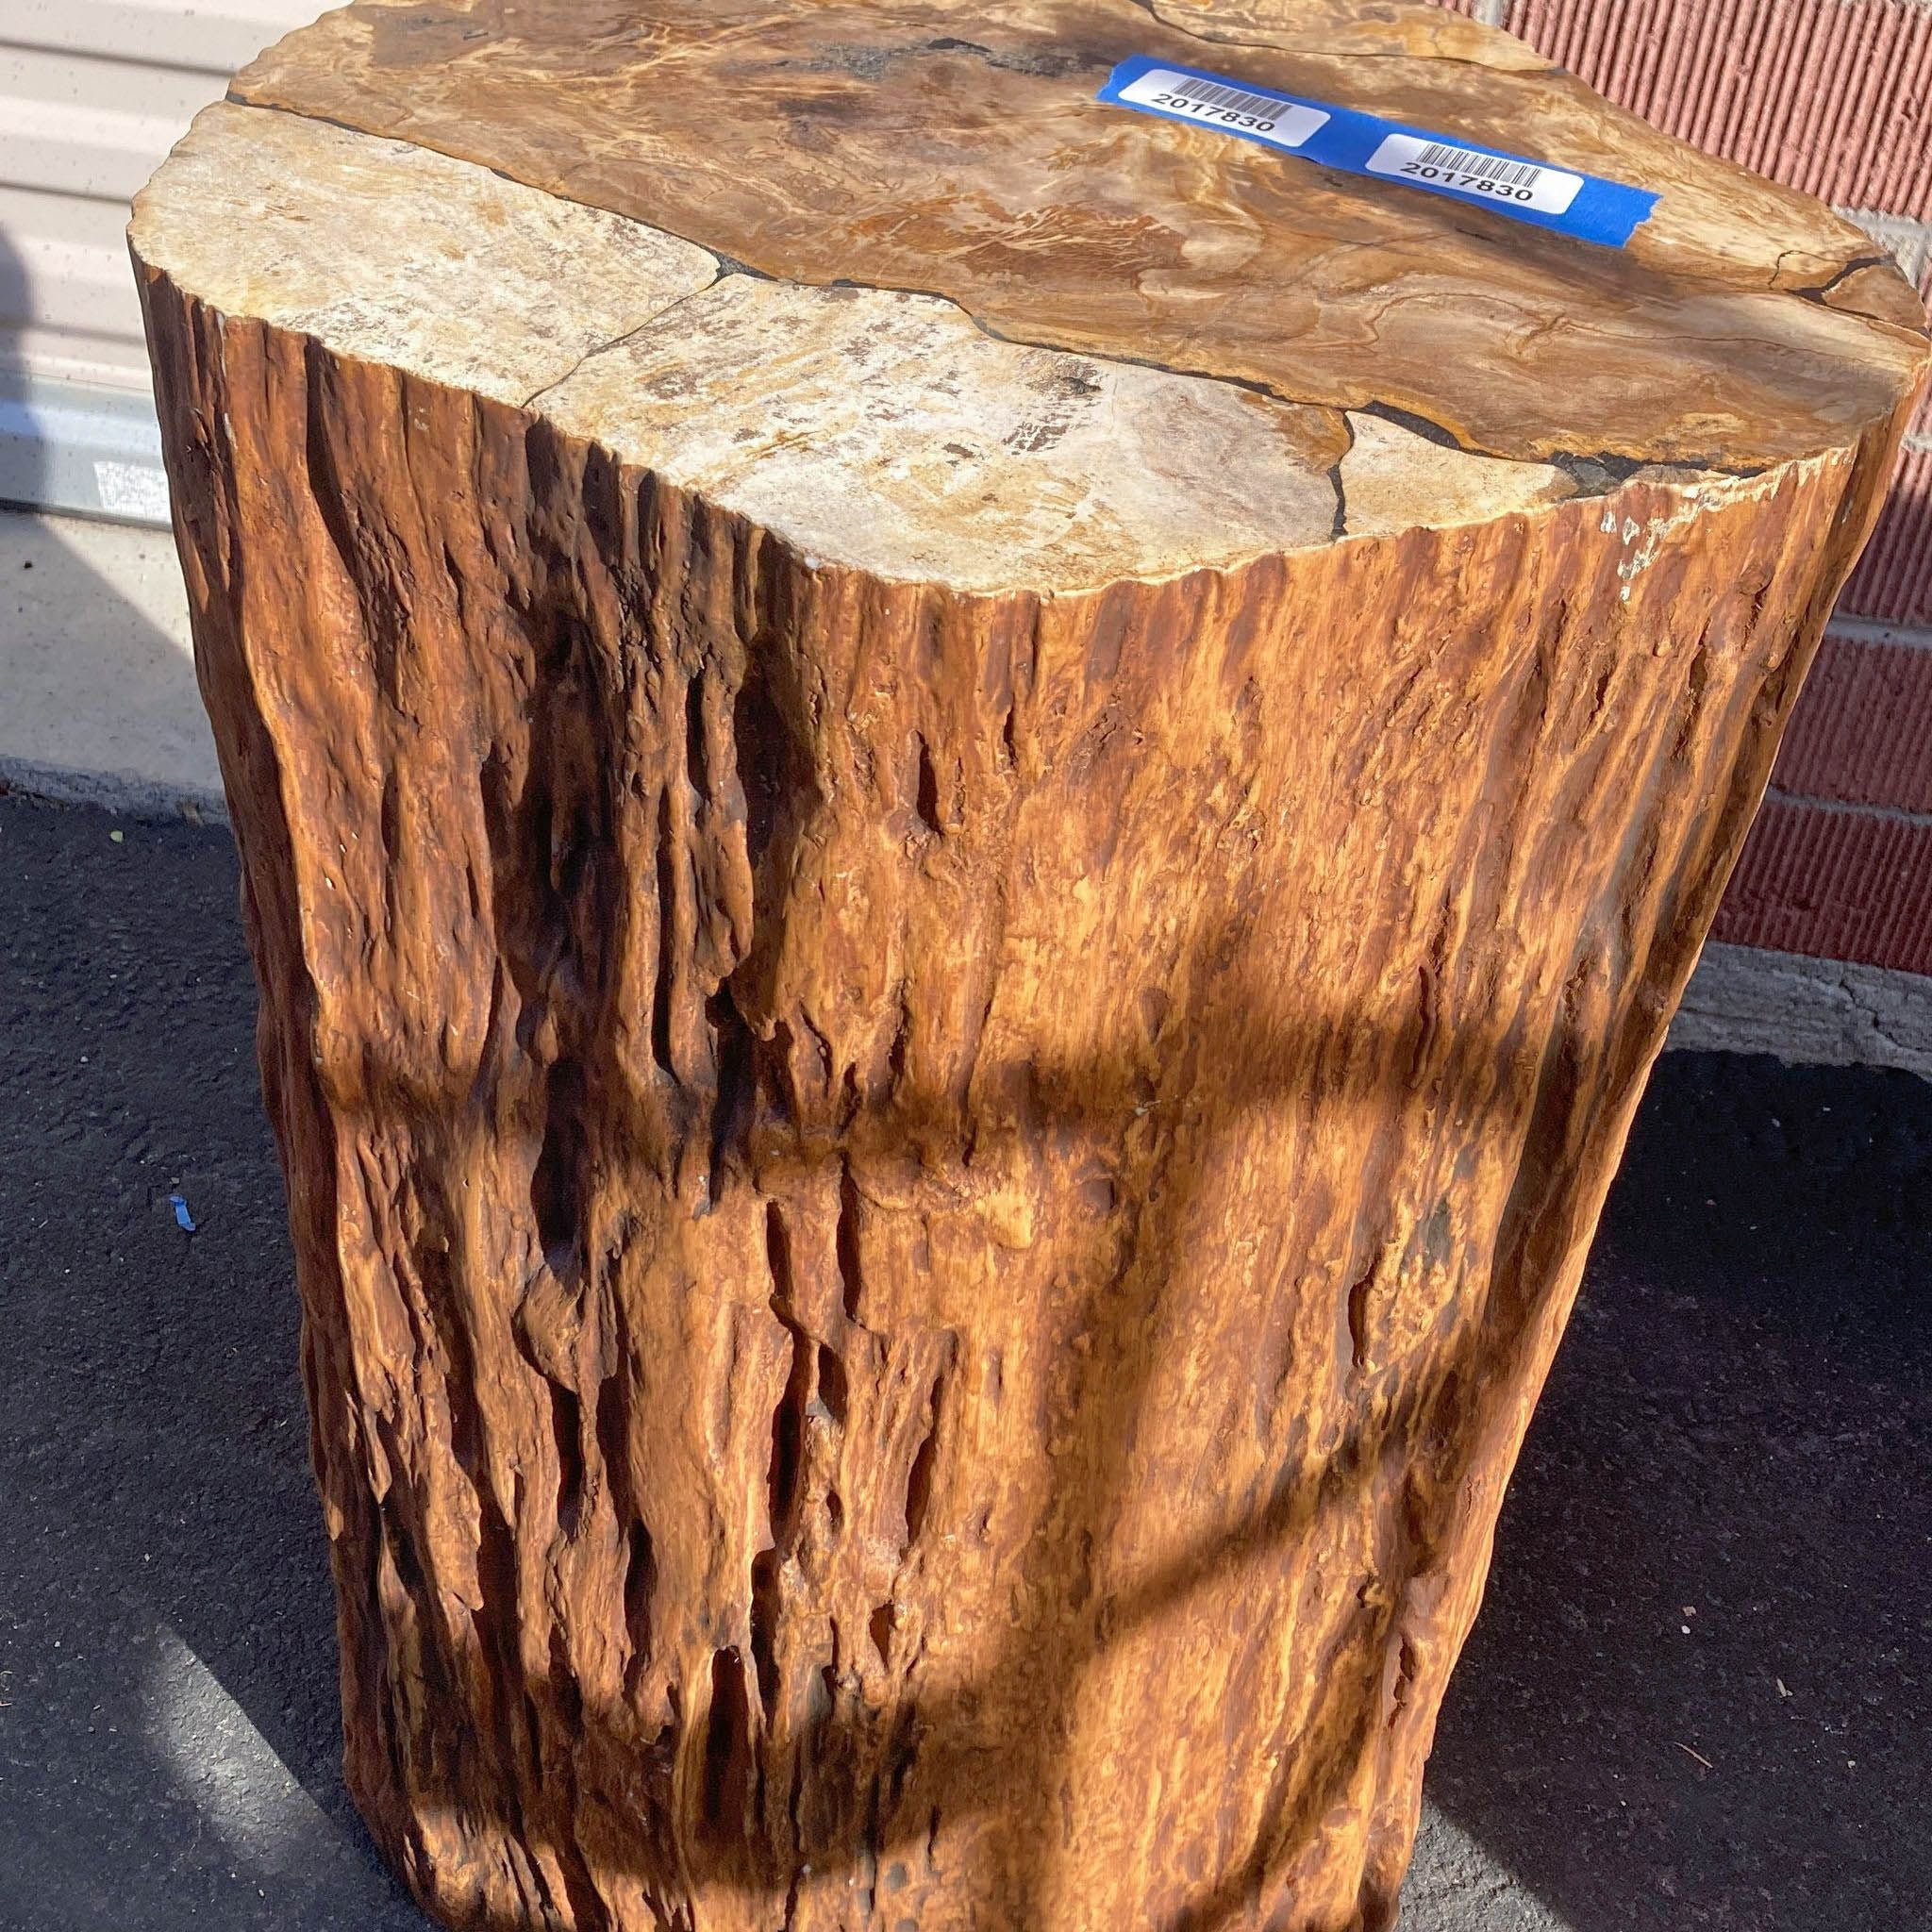 Hollow wooden side table with petrified wood top by Arhaus